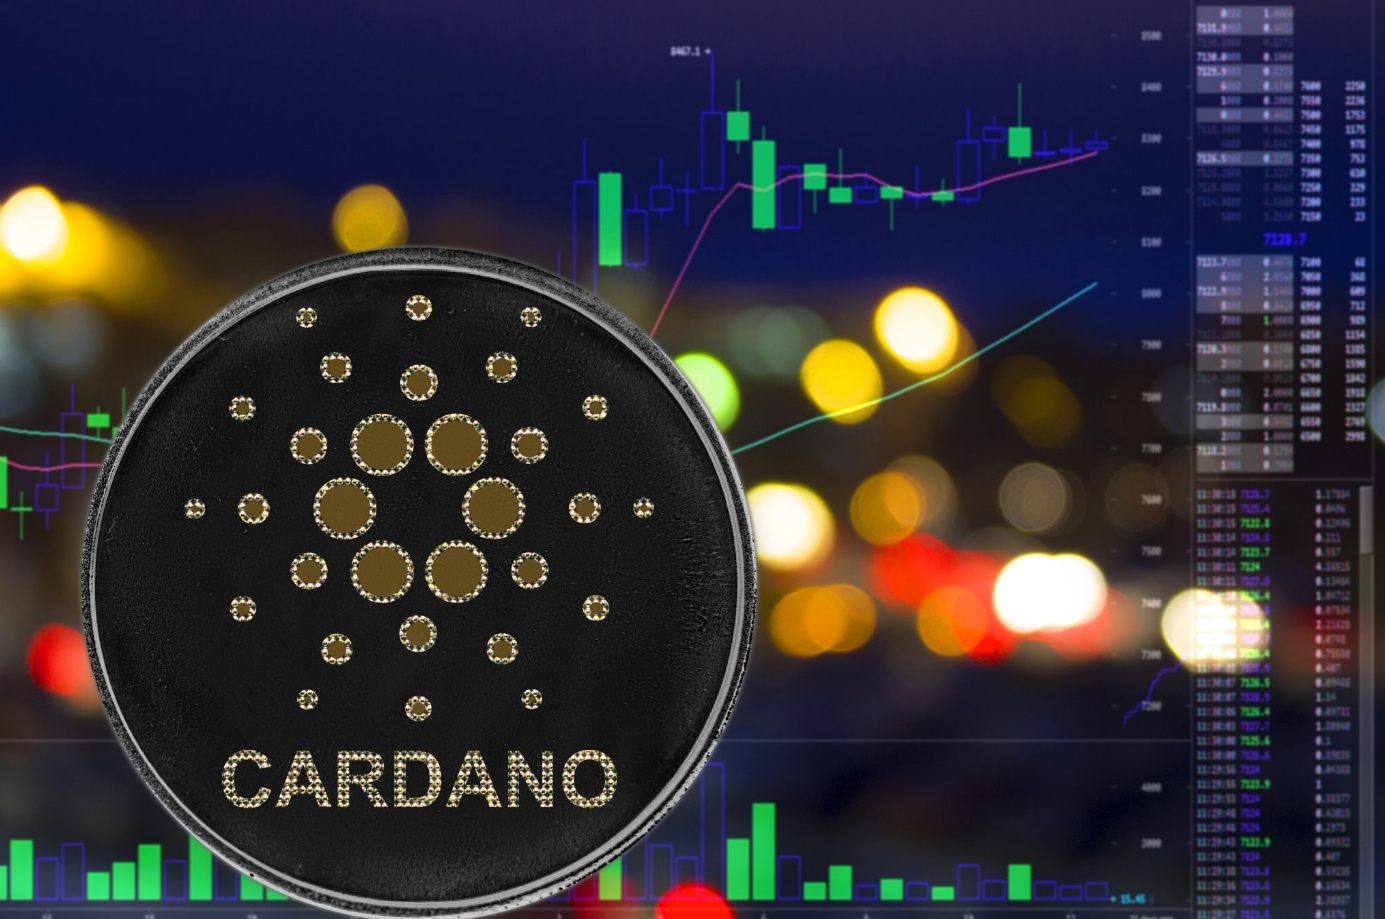 Cardano's DeFi and Smart Contract Activity Hits a New High